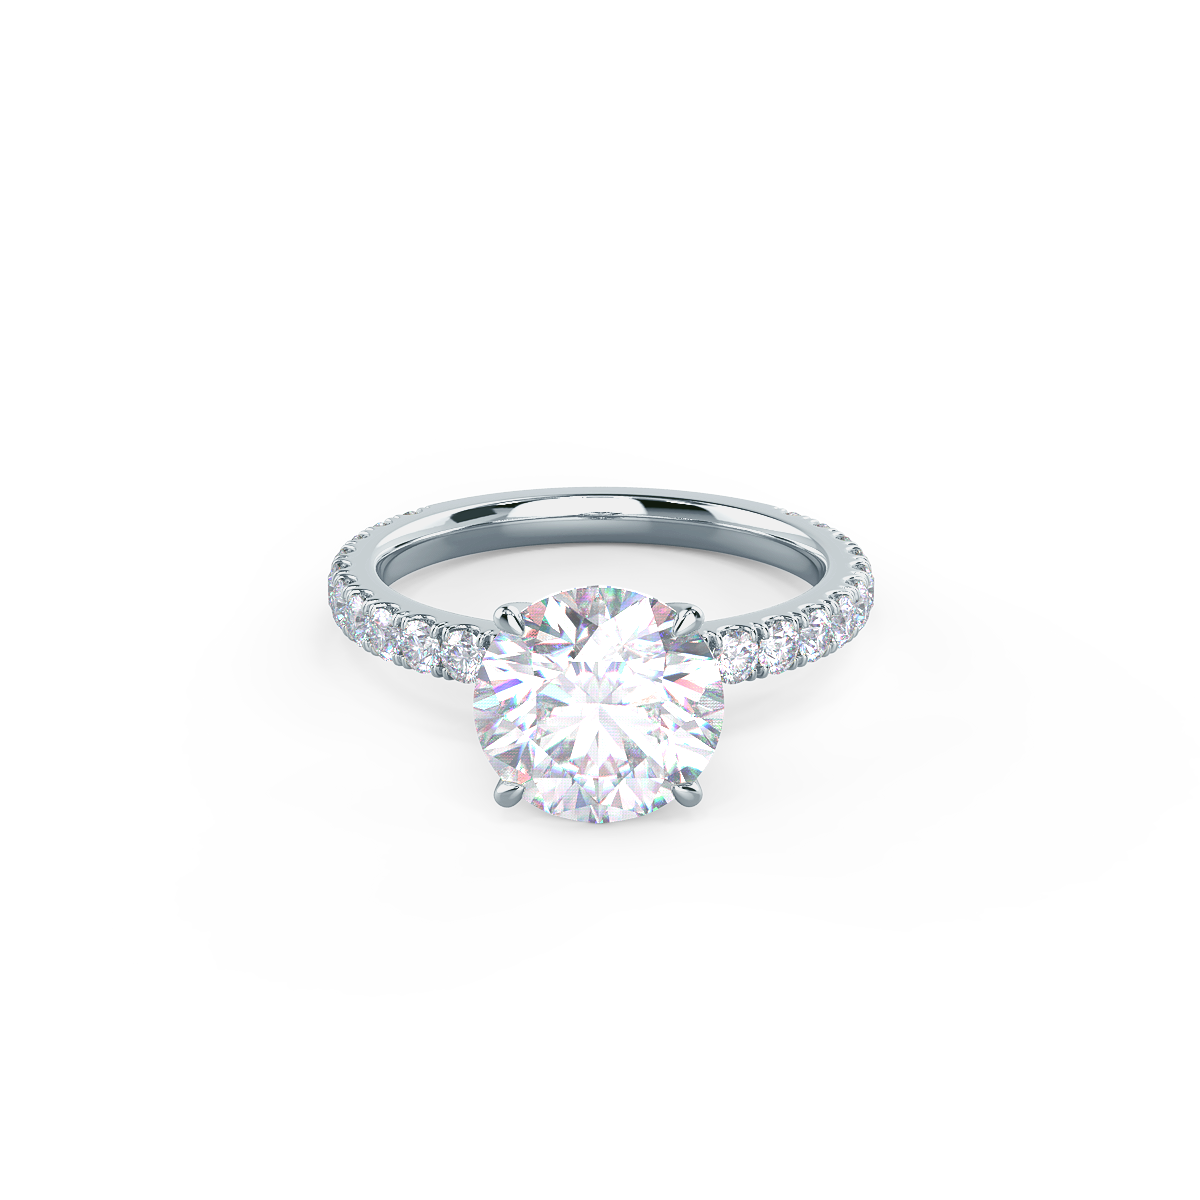 ROUND CLASSIC FOUR PRONG PAVÉ SETTING Lab grown Diamond Ring DEF Color VS+ Clarity